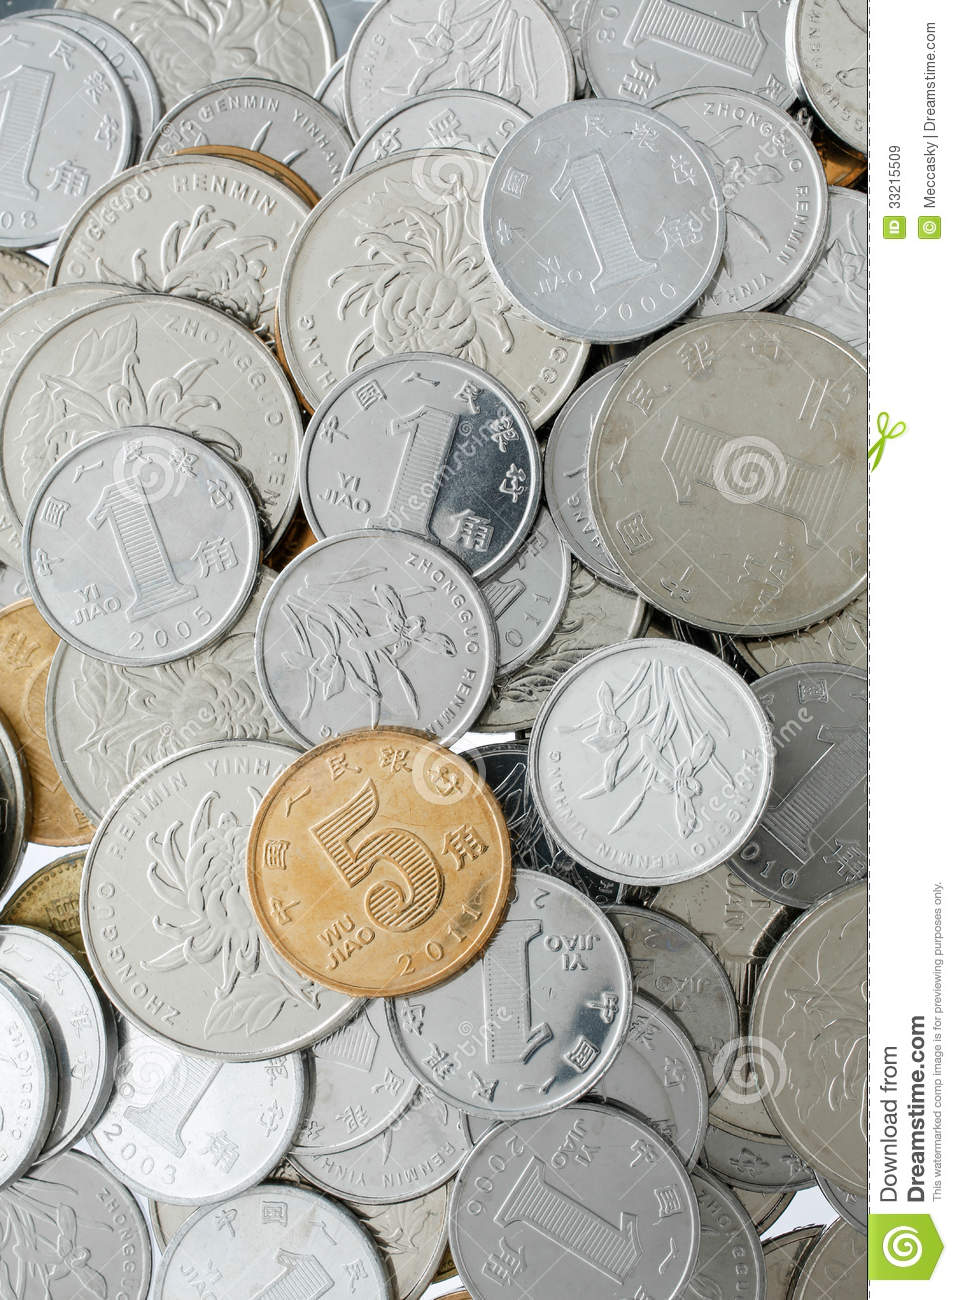 Chinese Yuan Coins Royalty Free Stock Images   Image  33215509